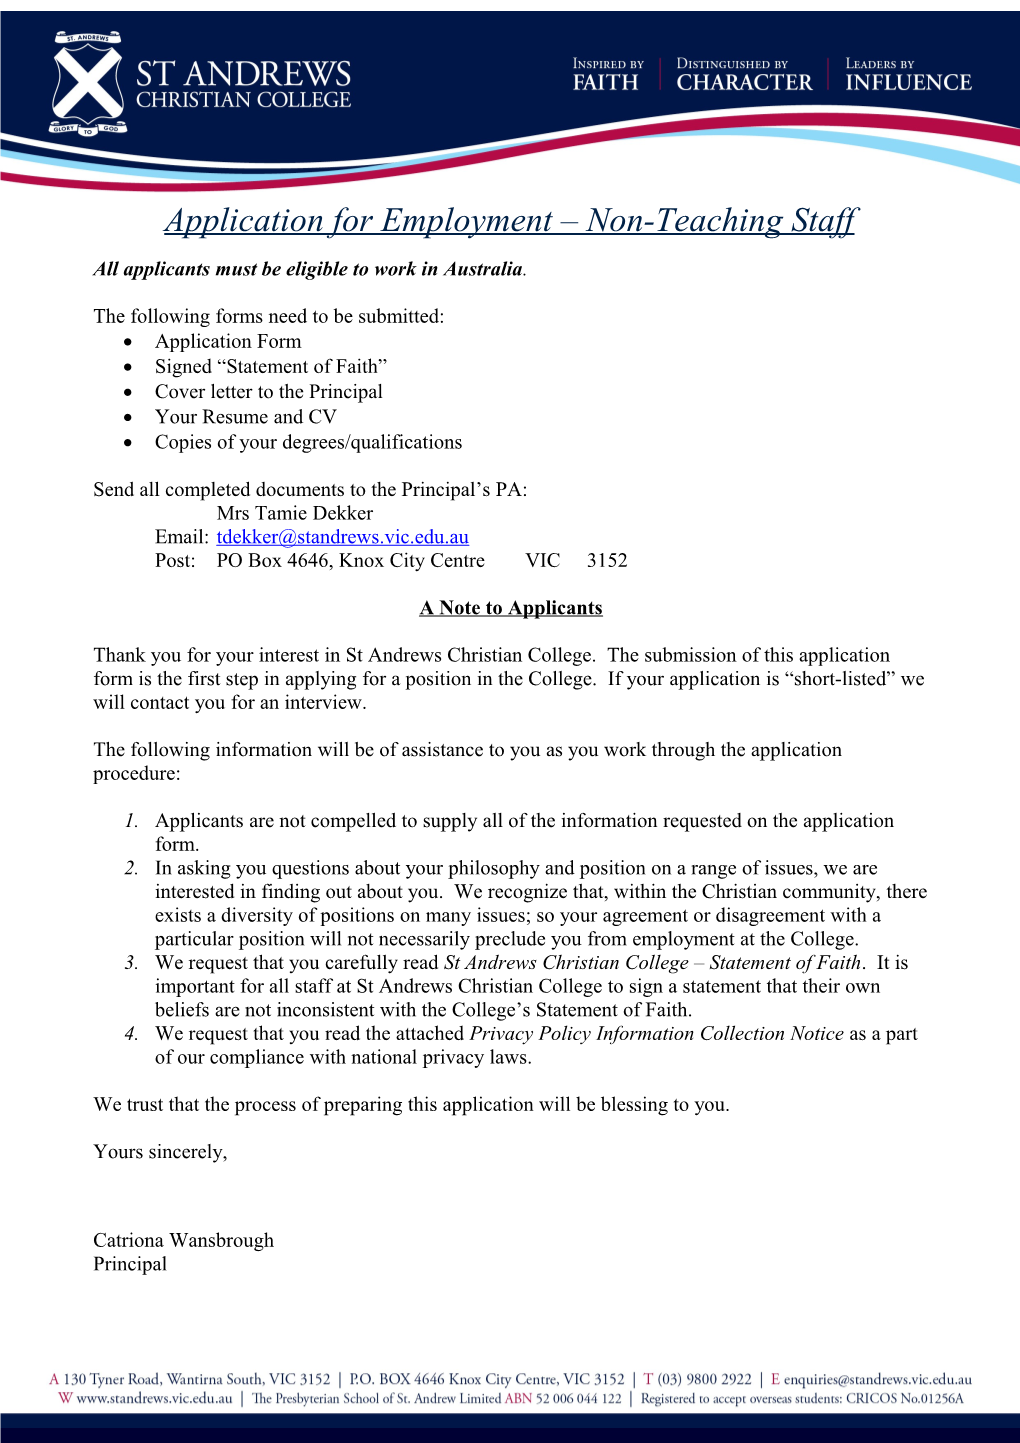 Application for Employment Non-Teaching Staff